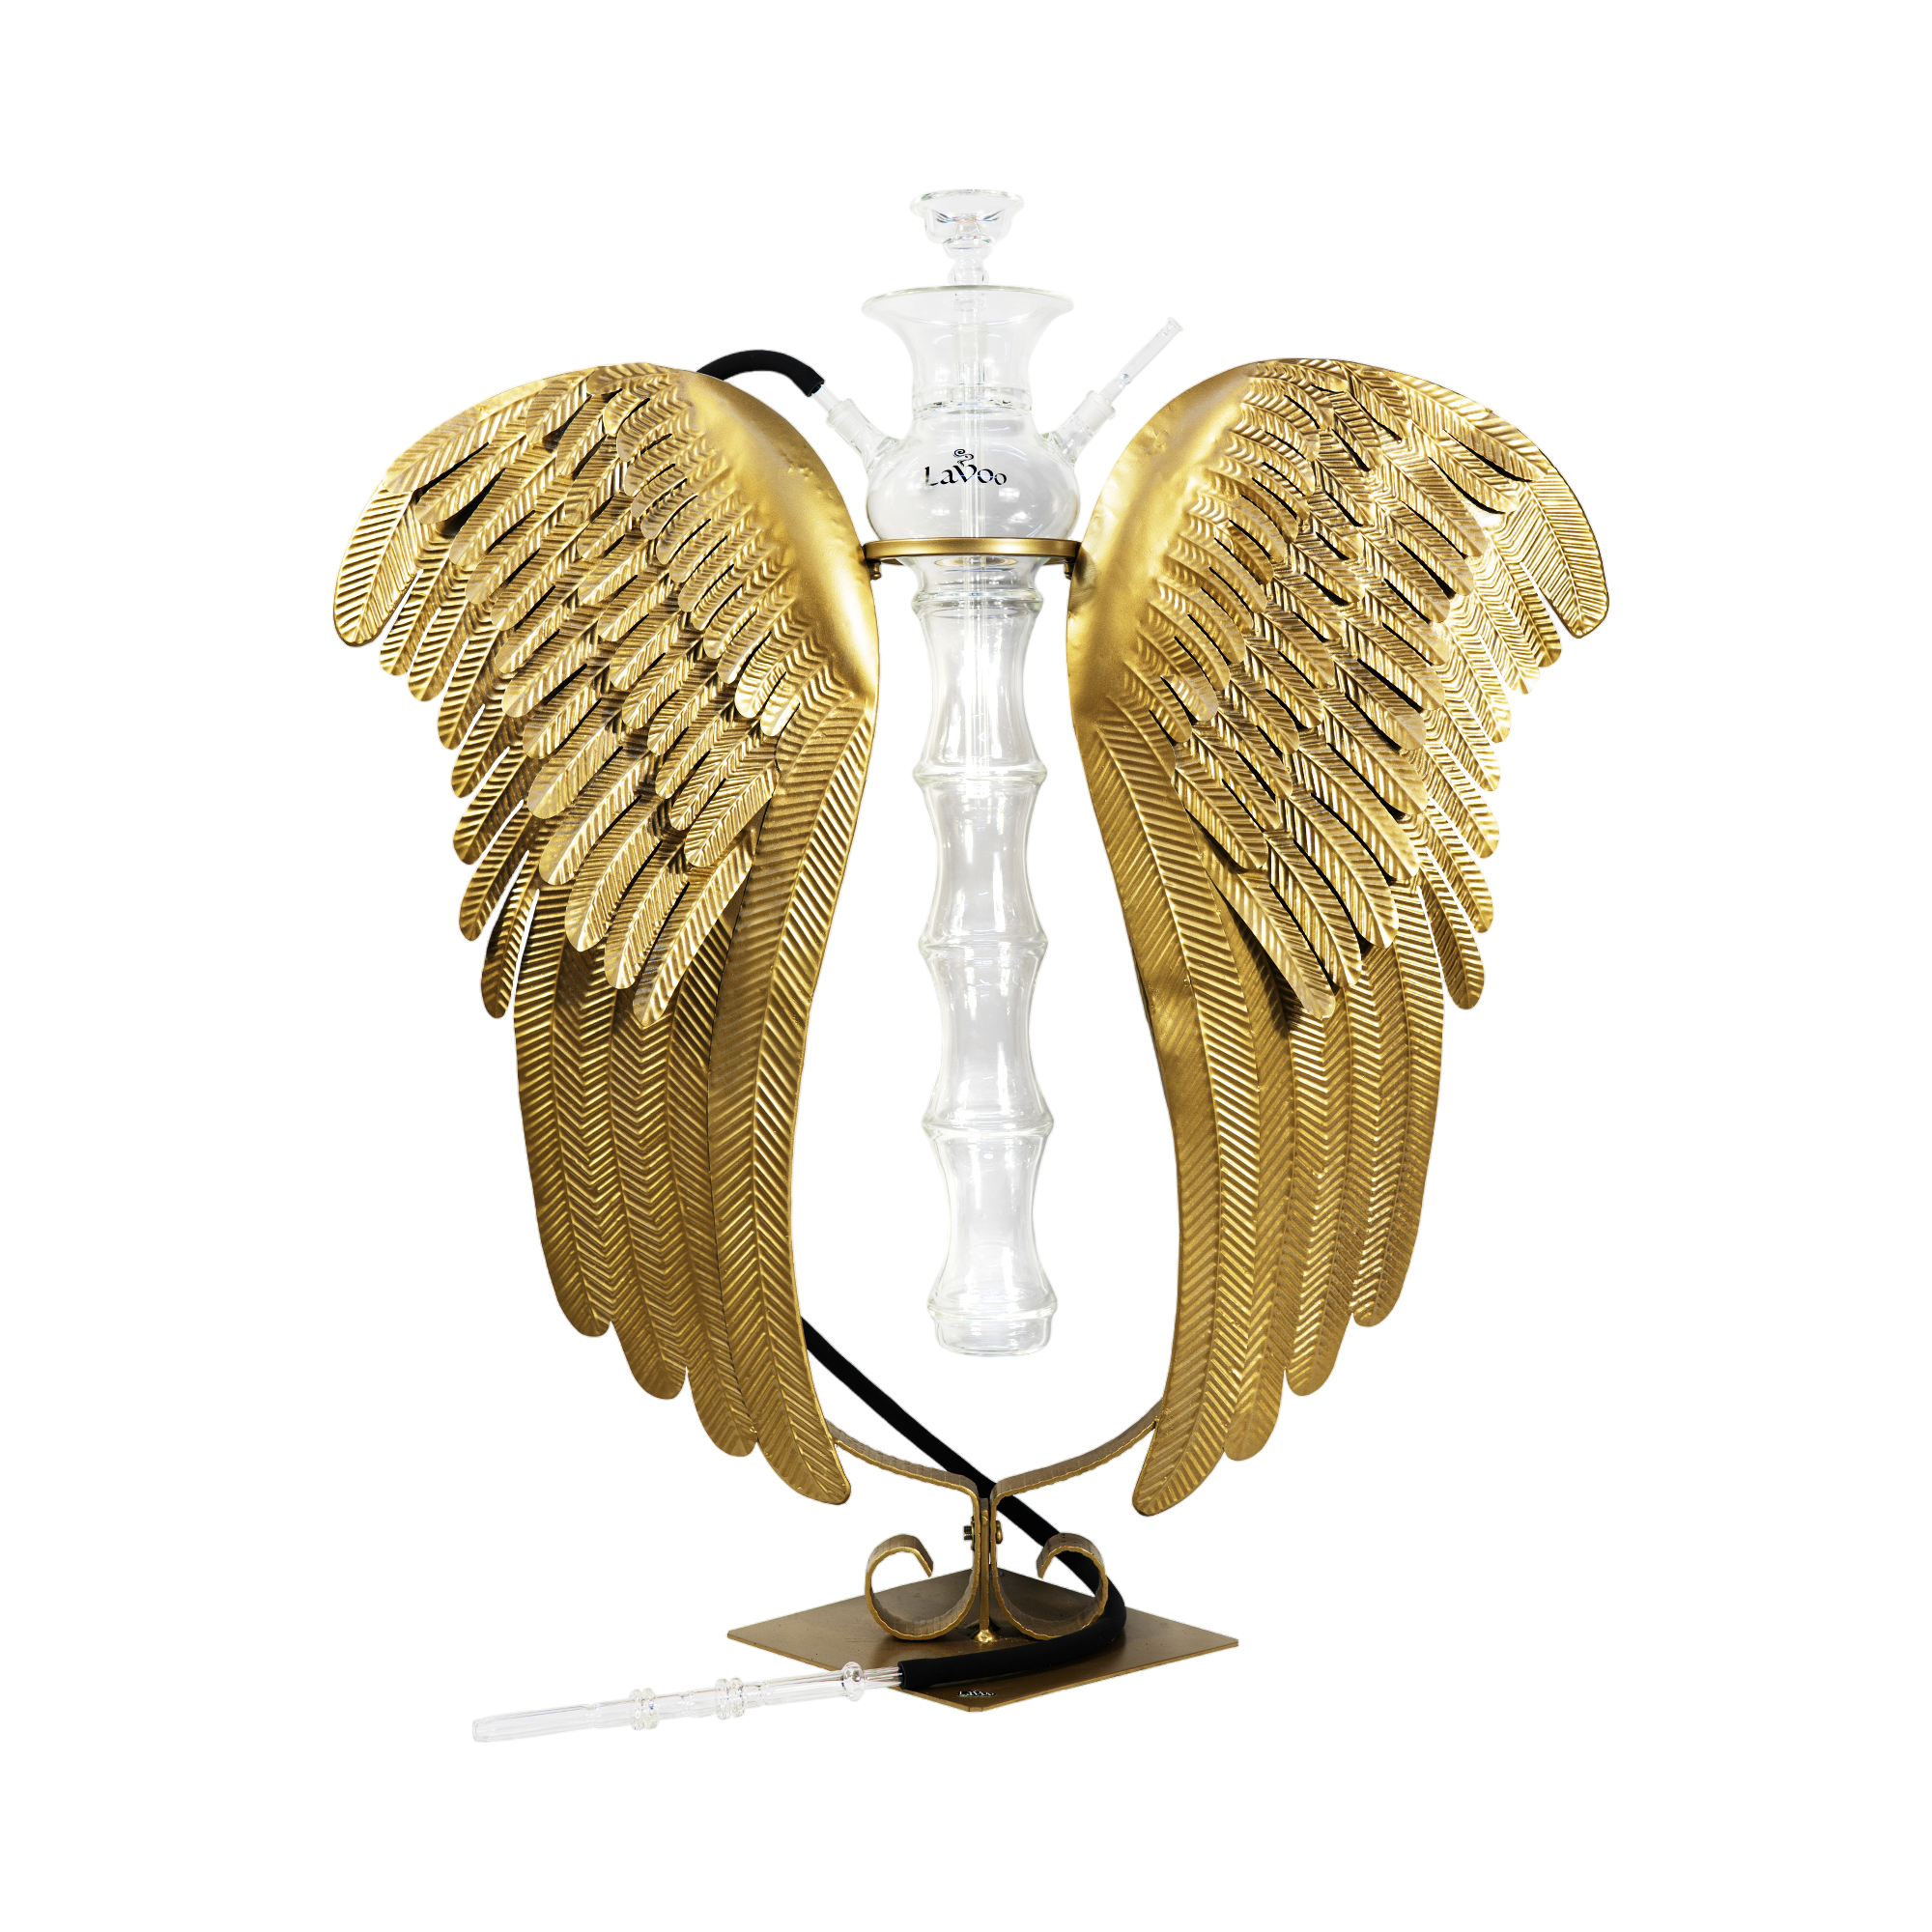 Lavoo ArchAngel Hookah with Handblown Glass and Rustic Wing Stand